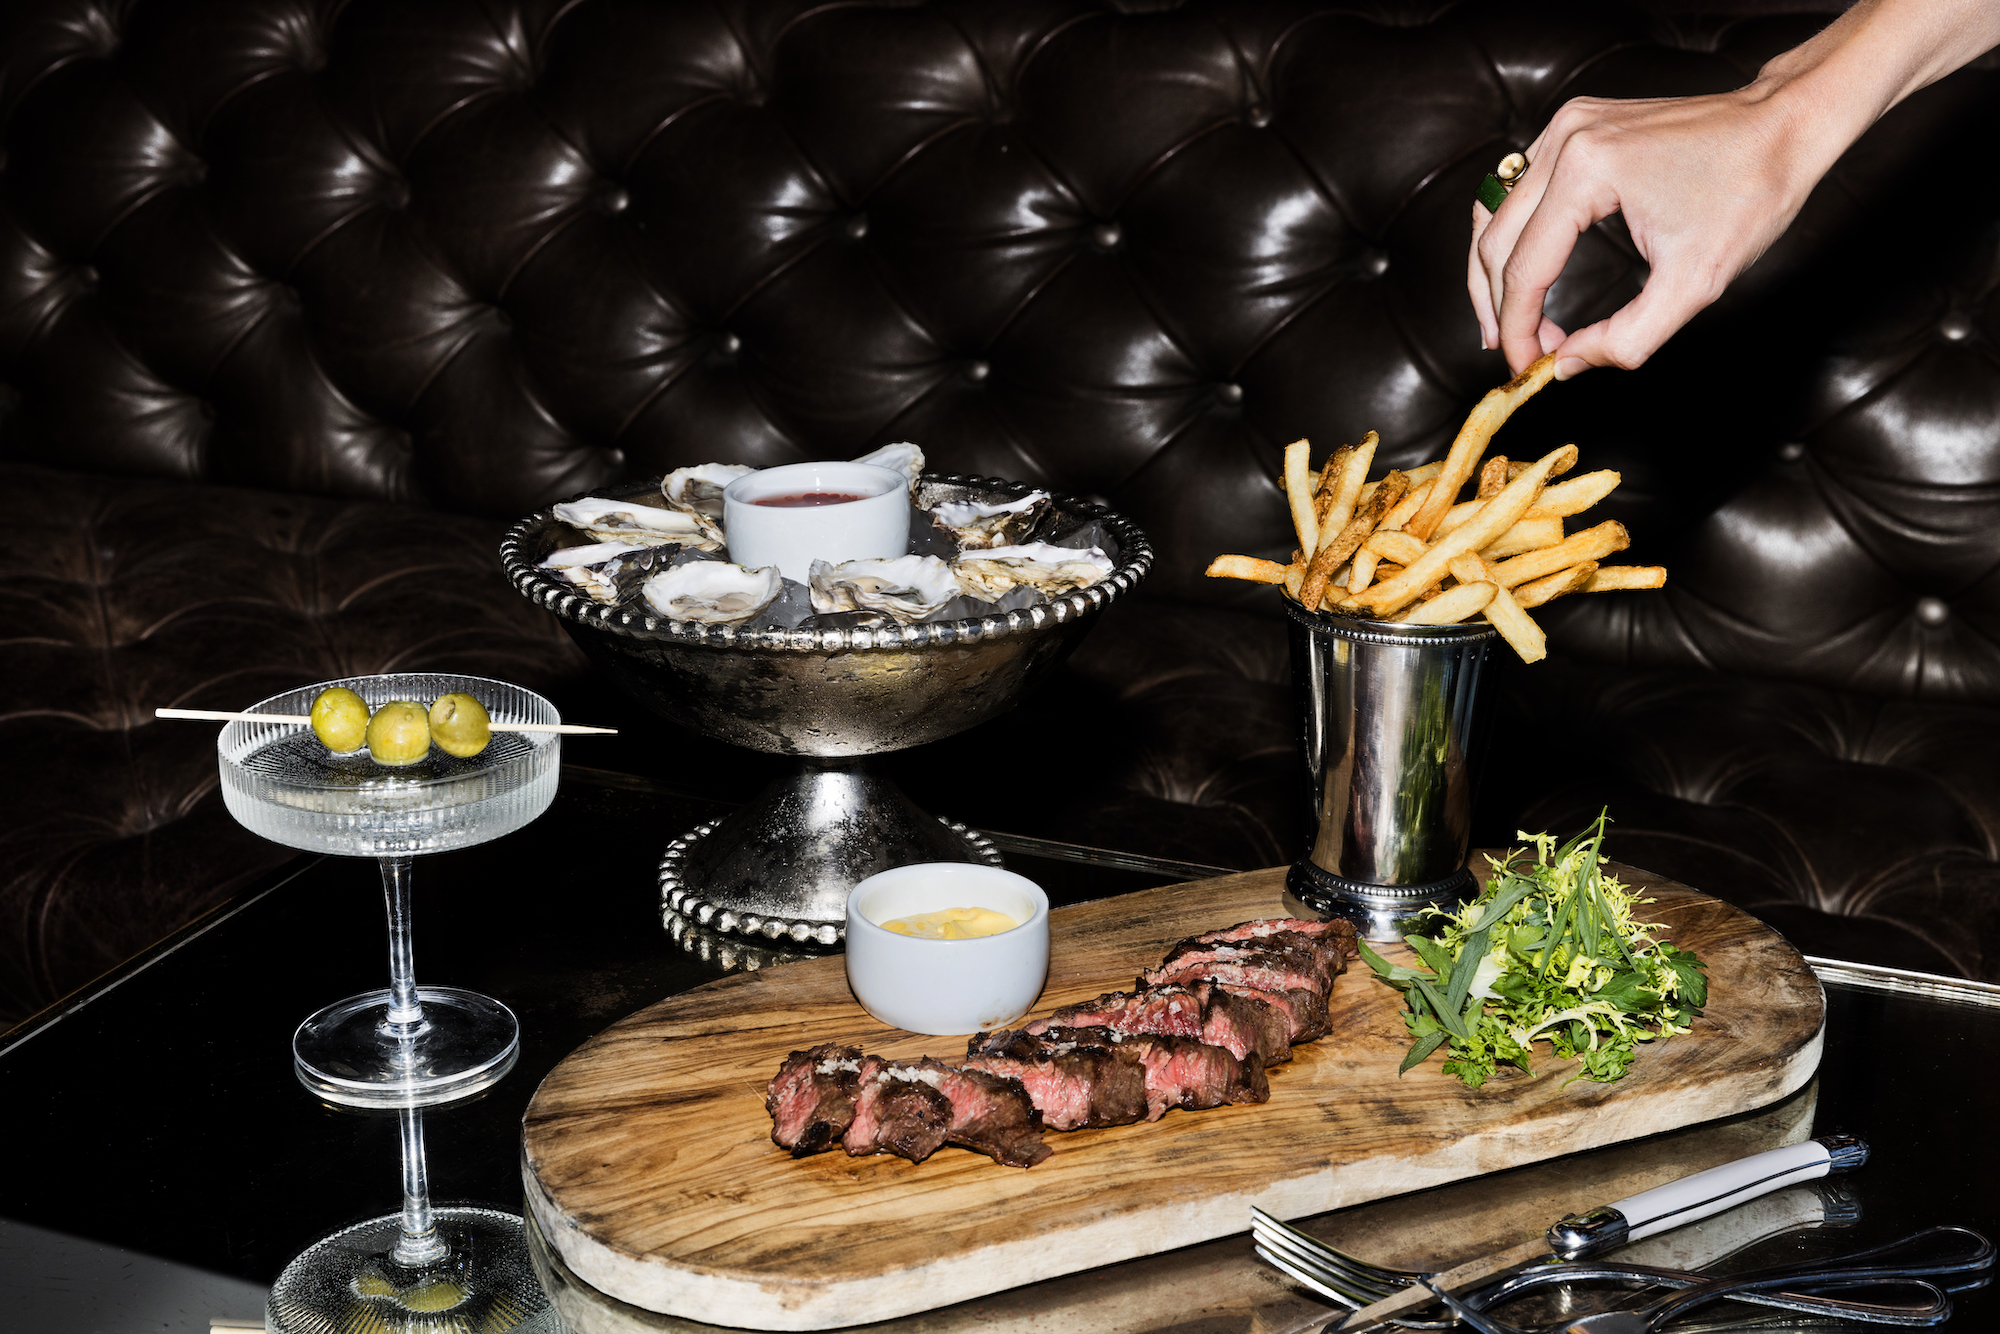 A hand grabs french fries as a flash goes off next to a steak inside a dark restaurant with black leather booths.